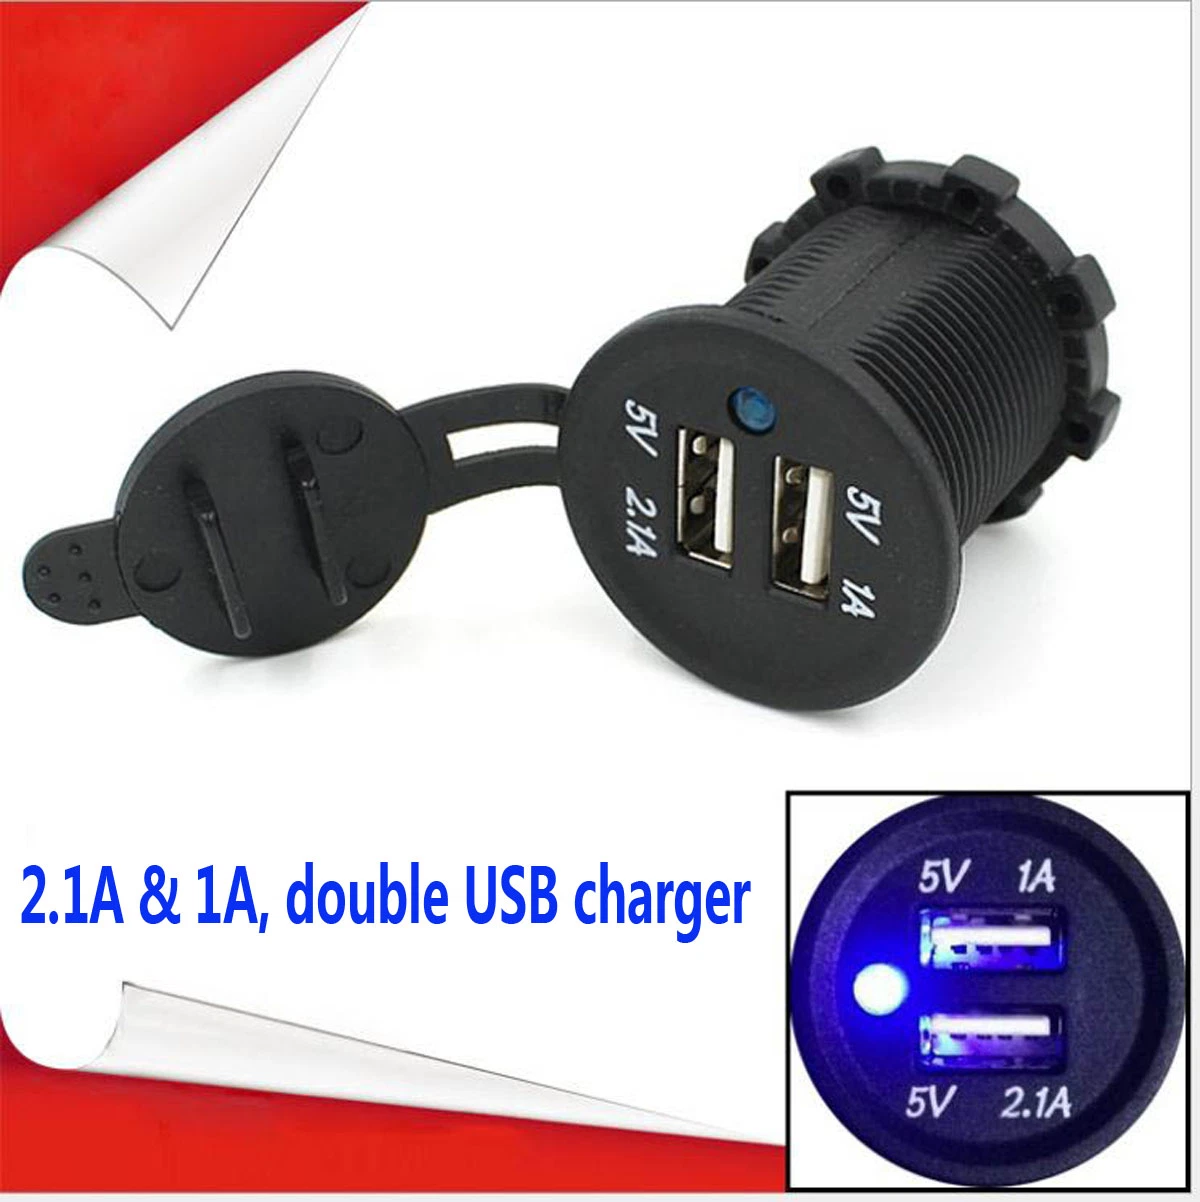 Car USB Charger Bus USB Charger Dual USB Charger Adapter Socket